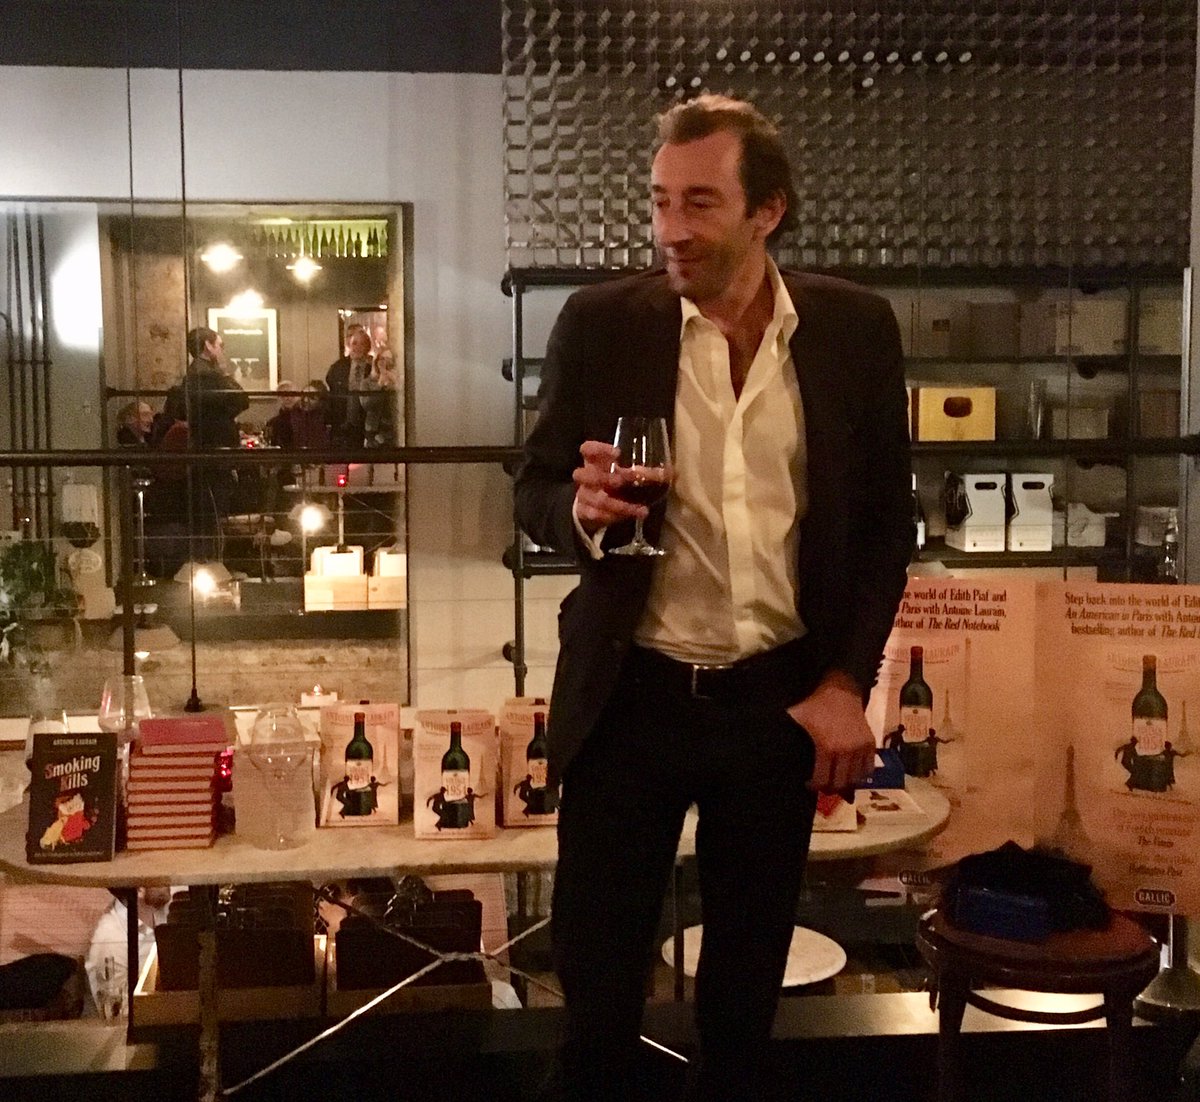 What a très bien evening with #AntoineLaurain and @BelgraviaB celebrating #BeaujolaisNouveau day! We raised a glass to his enchanting novel #Vintage1954 (and apparently this year’s wine harvest tastes like bananas... )🍷🍾